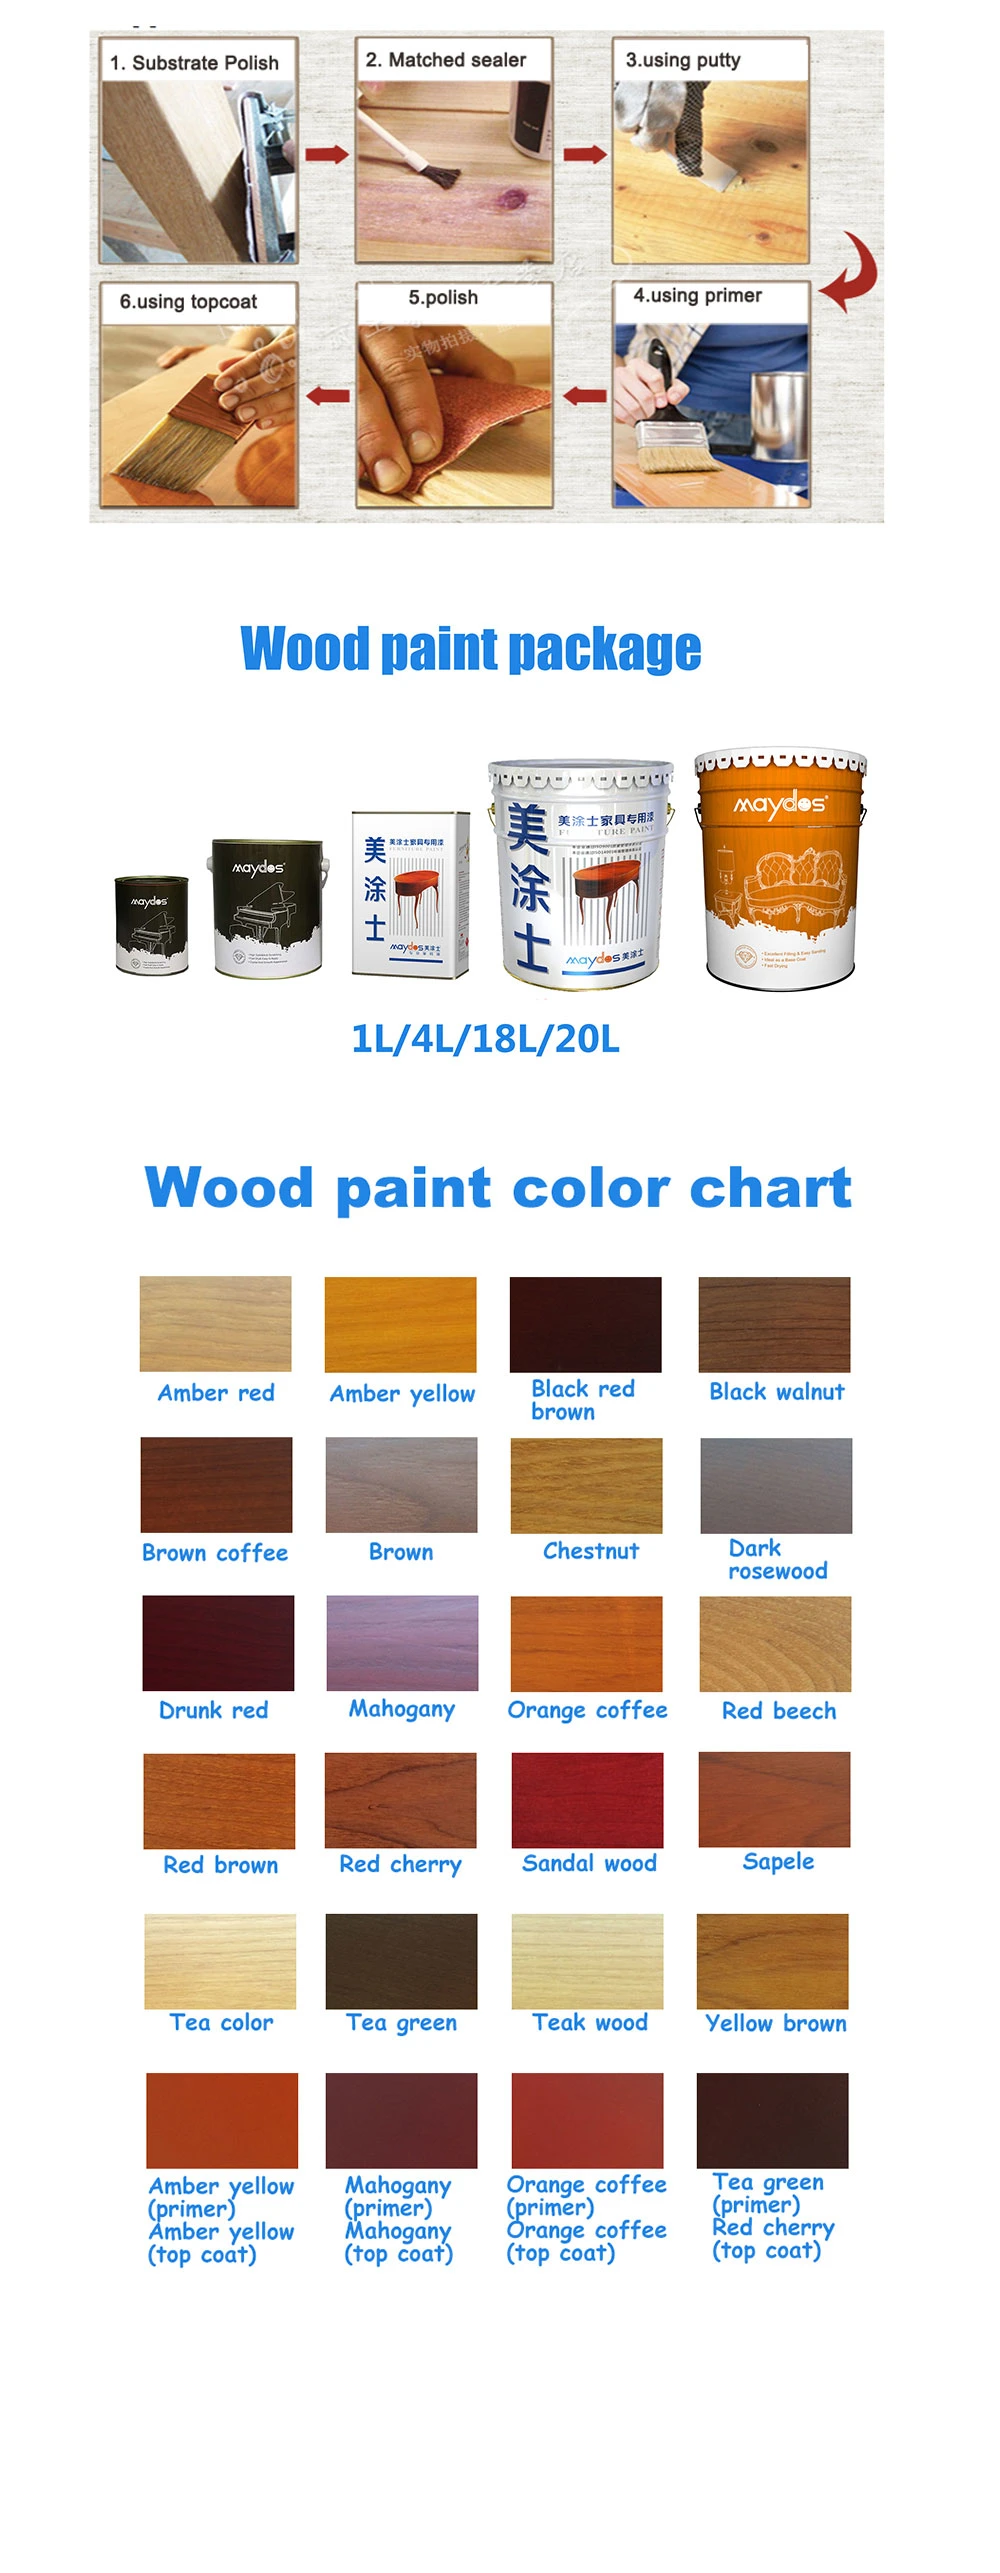 Maydos Gloss Wear Resistant Wood Paint